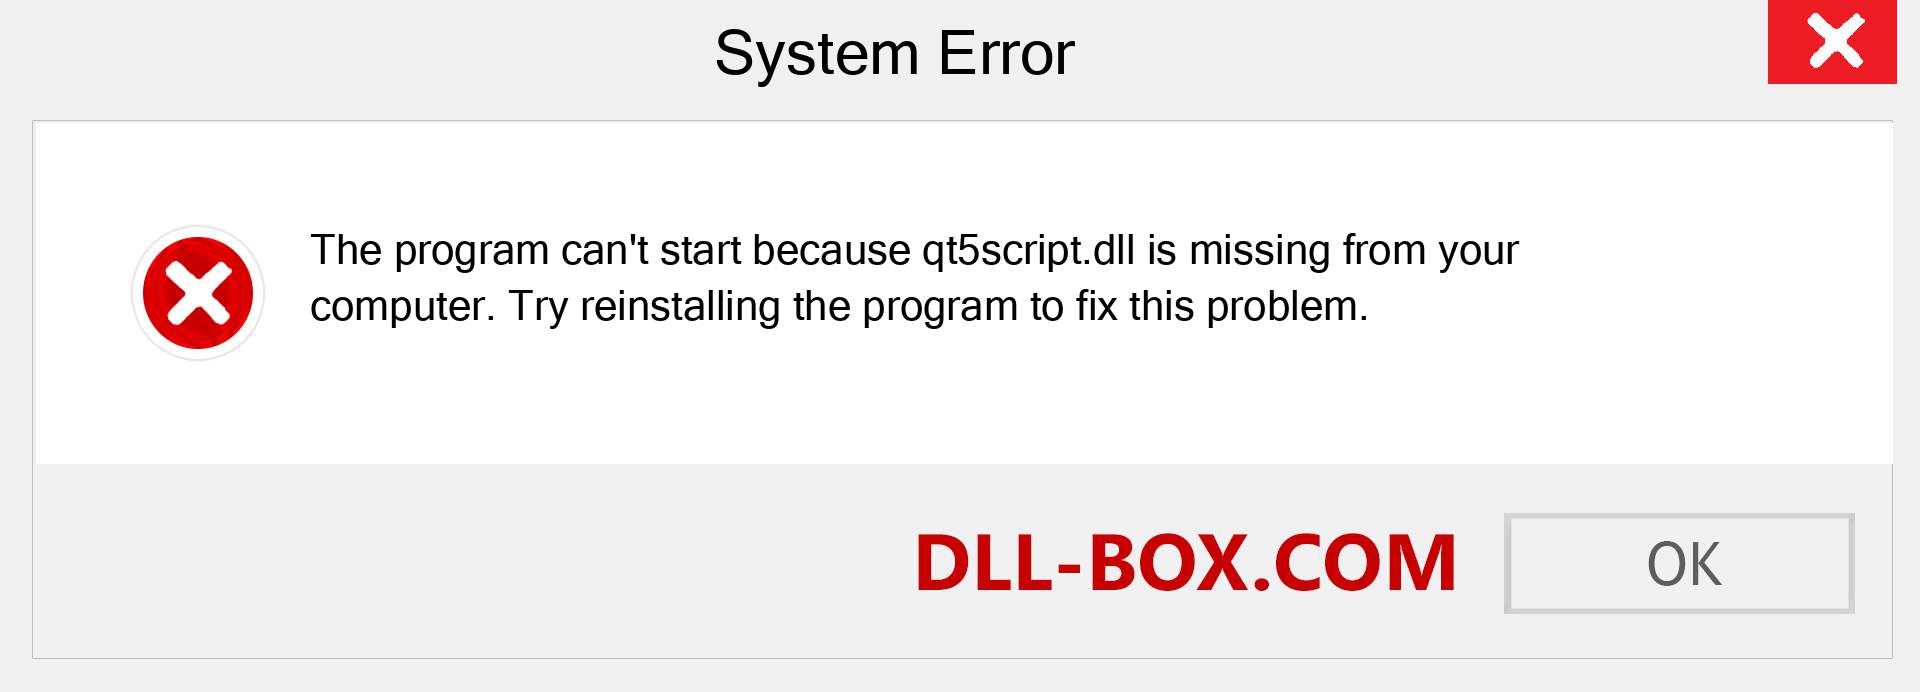  qt5script.dll file is missing?. Download for Windows 7, 8, 10 - Fix  qt5script dll Missing Error on Windows, photos, images